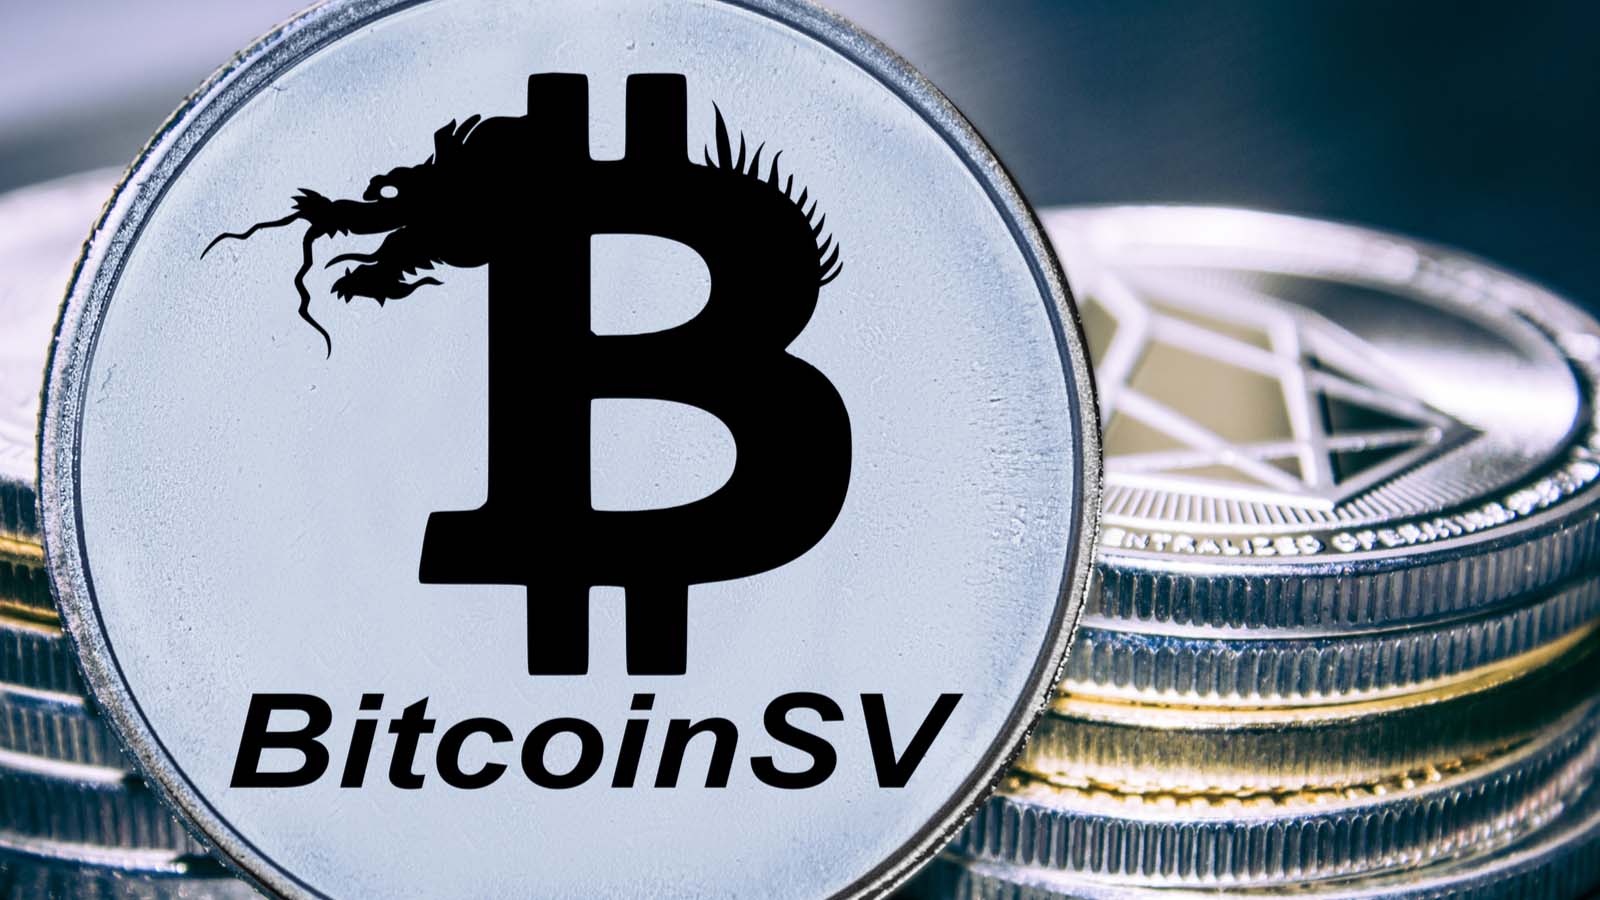 Why is bitcoin sv not going up